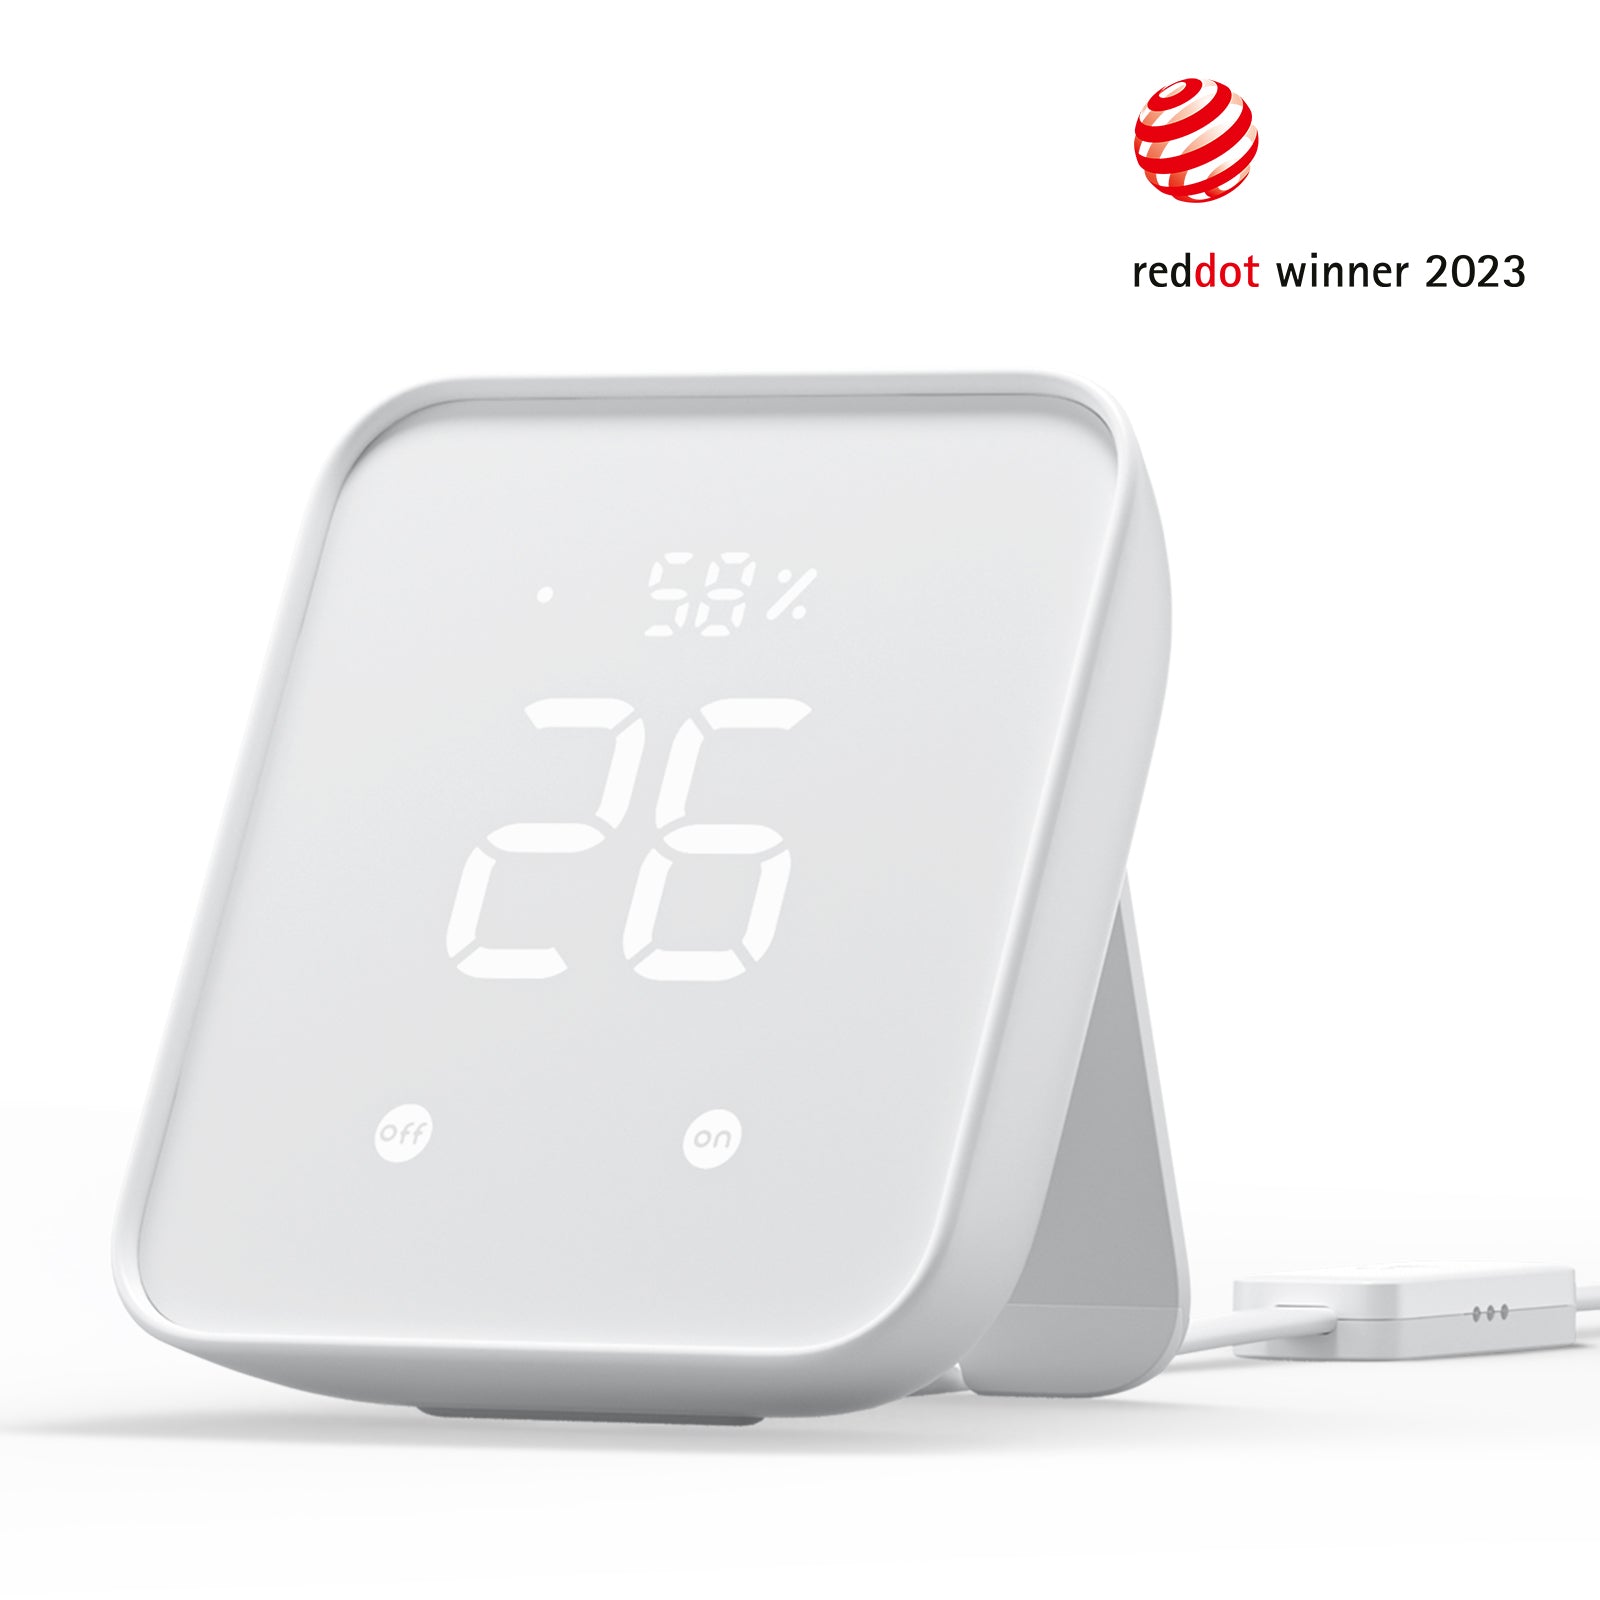 SwitchBot Indoor/Outdoor Thermo-Hygrometer, Temperature Humidity Monitor